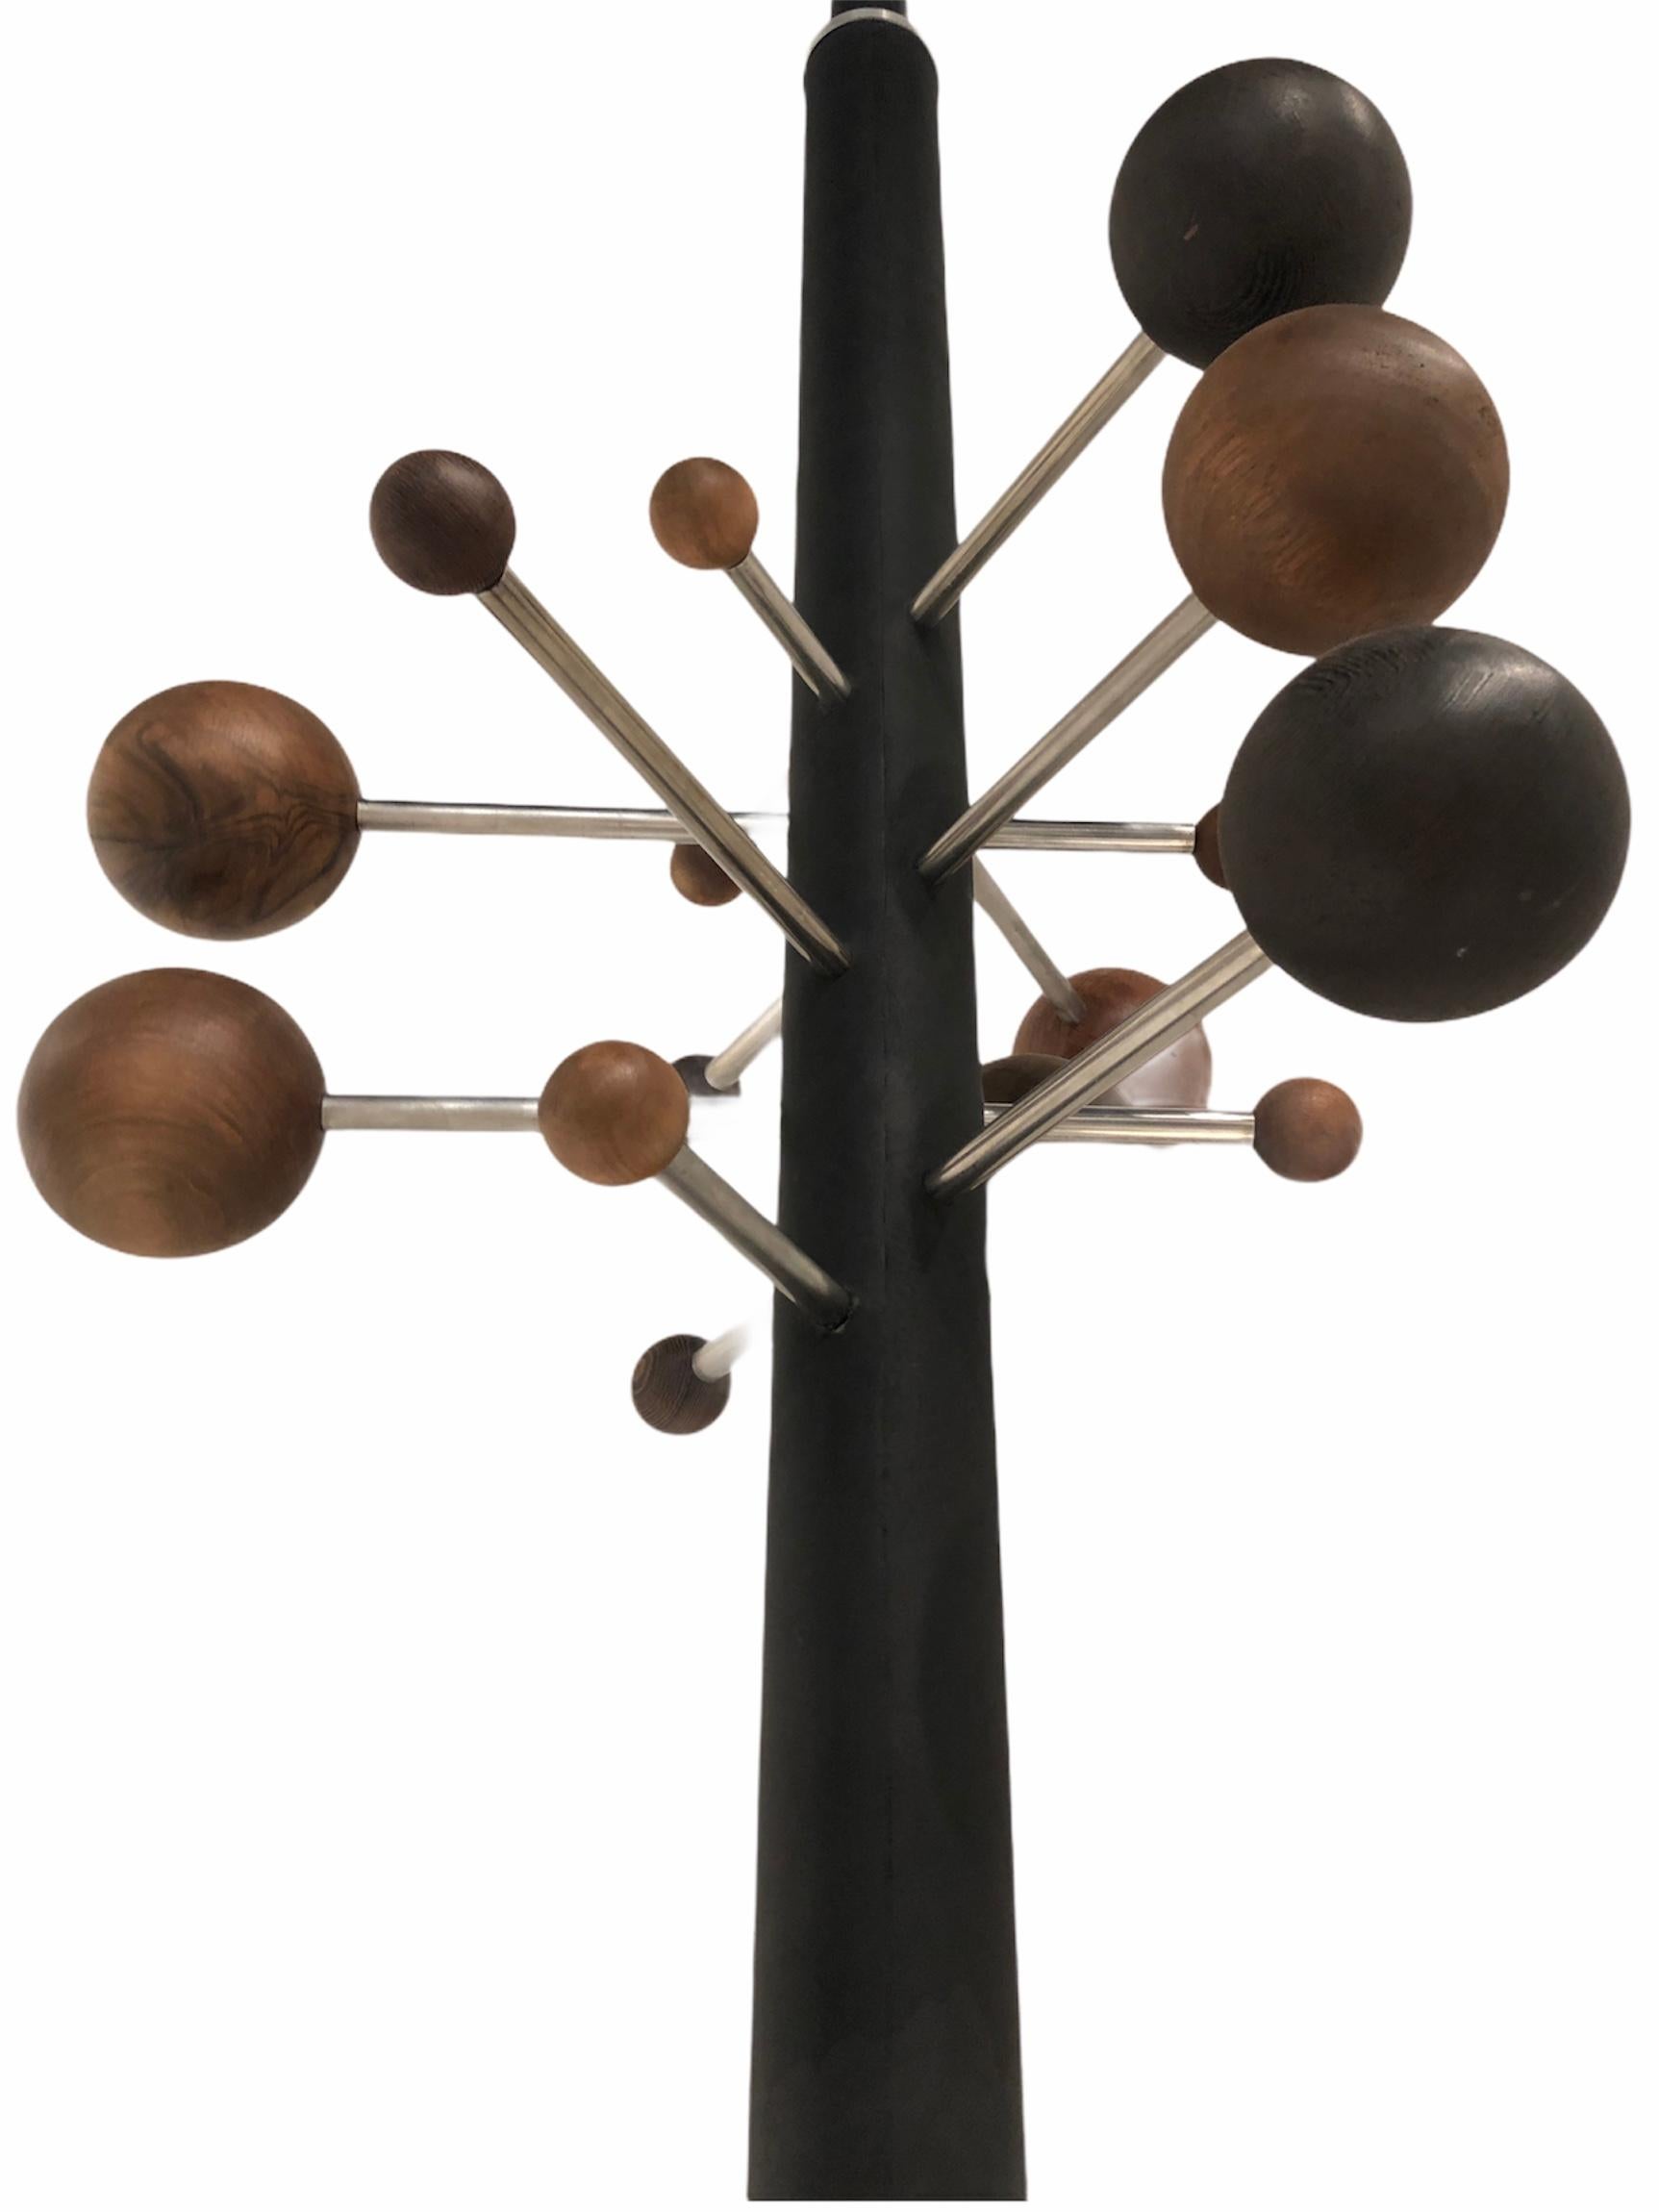 Osvaldo Borsani for Tecno circa 1970 coatrack with telescopic stem of black lacquered metal tube and leather with Aluminium feet. Different wood species. Good conditions: Measurements: Height 1 256 cm height 2 370cm.